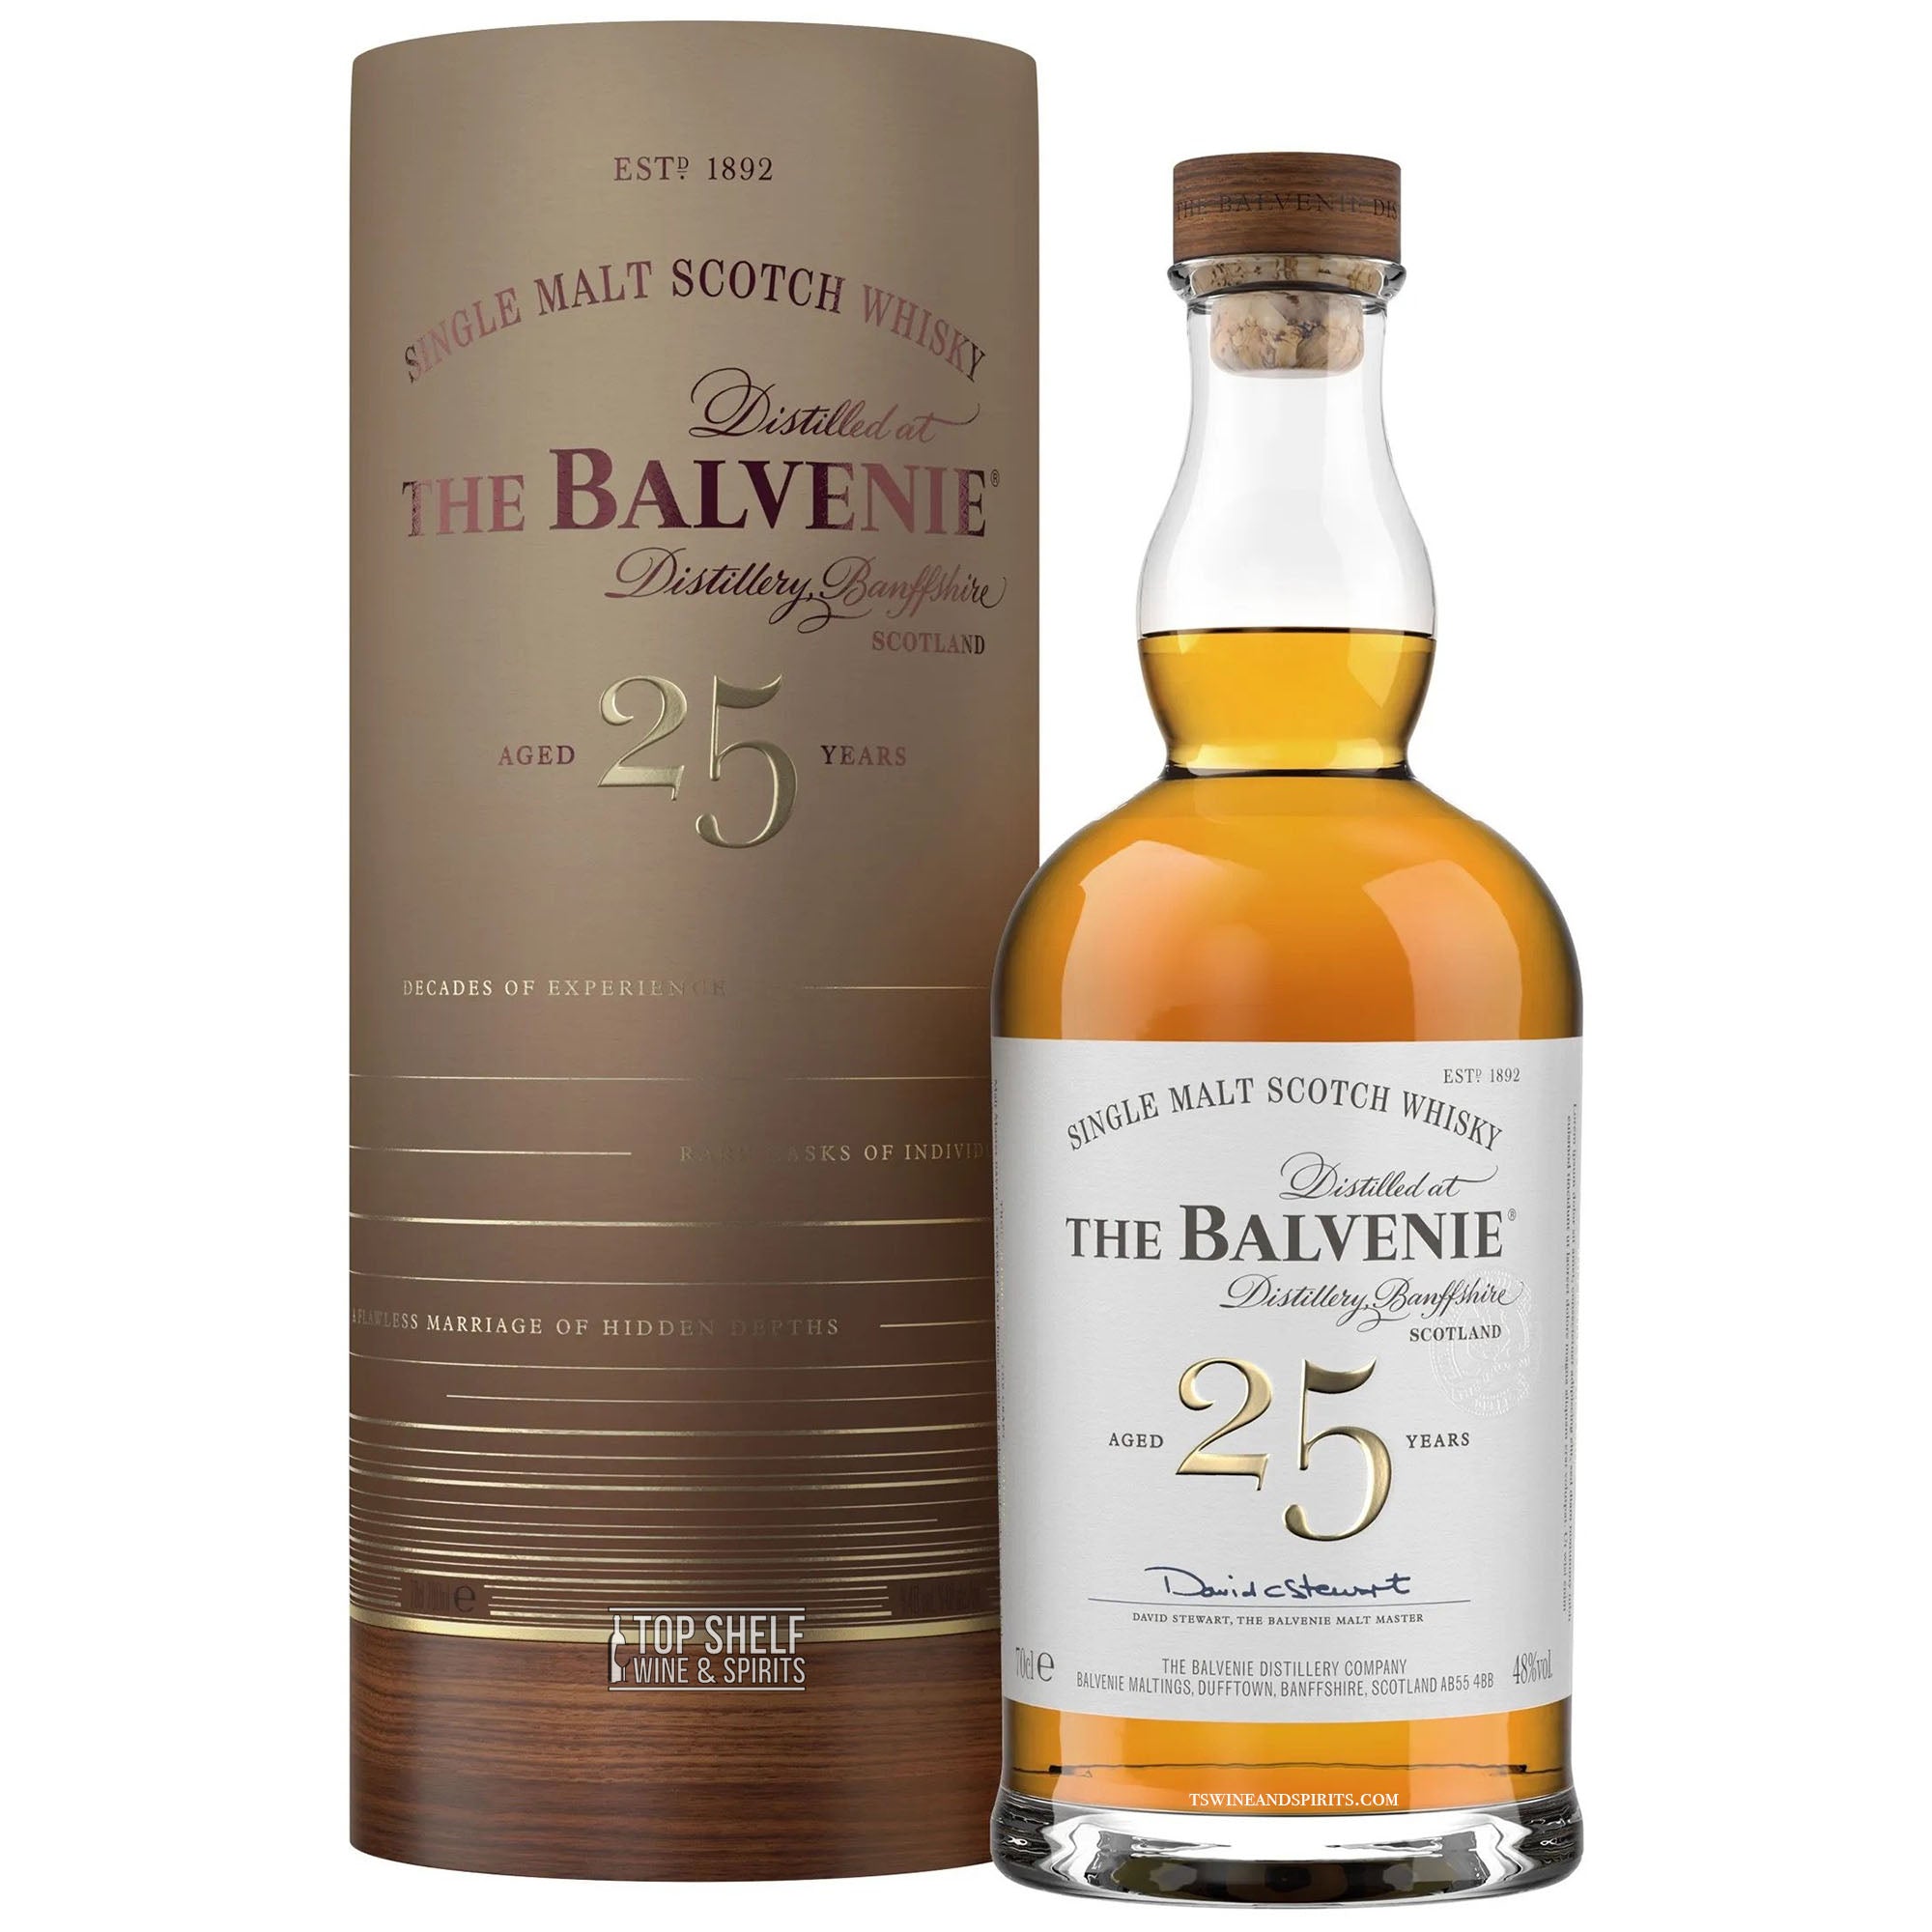 The Balvenie 25 Year Old Rare Marriages Scotch Whisky